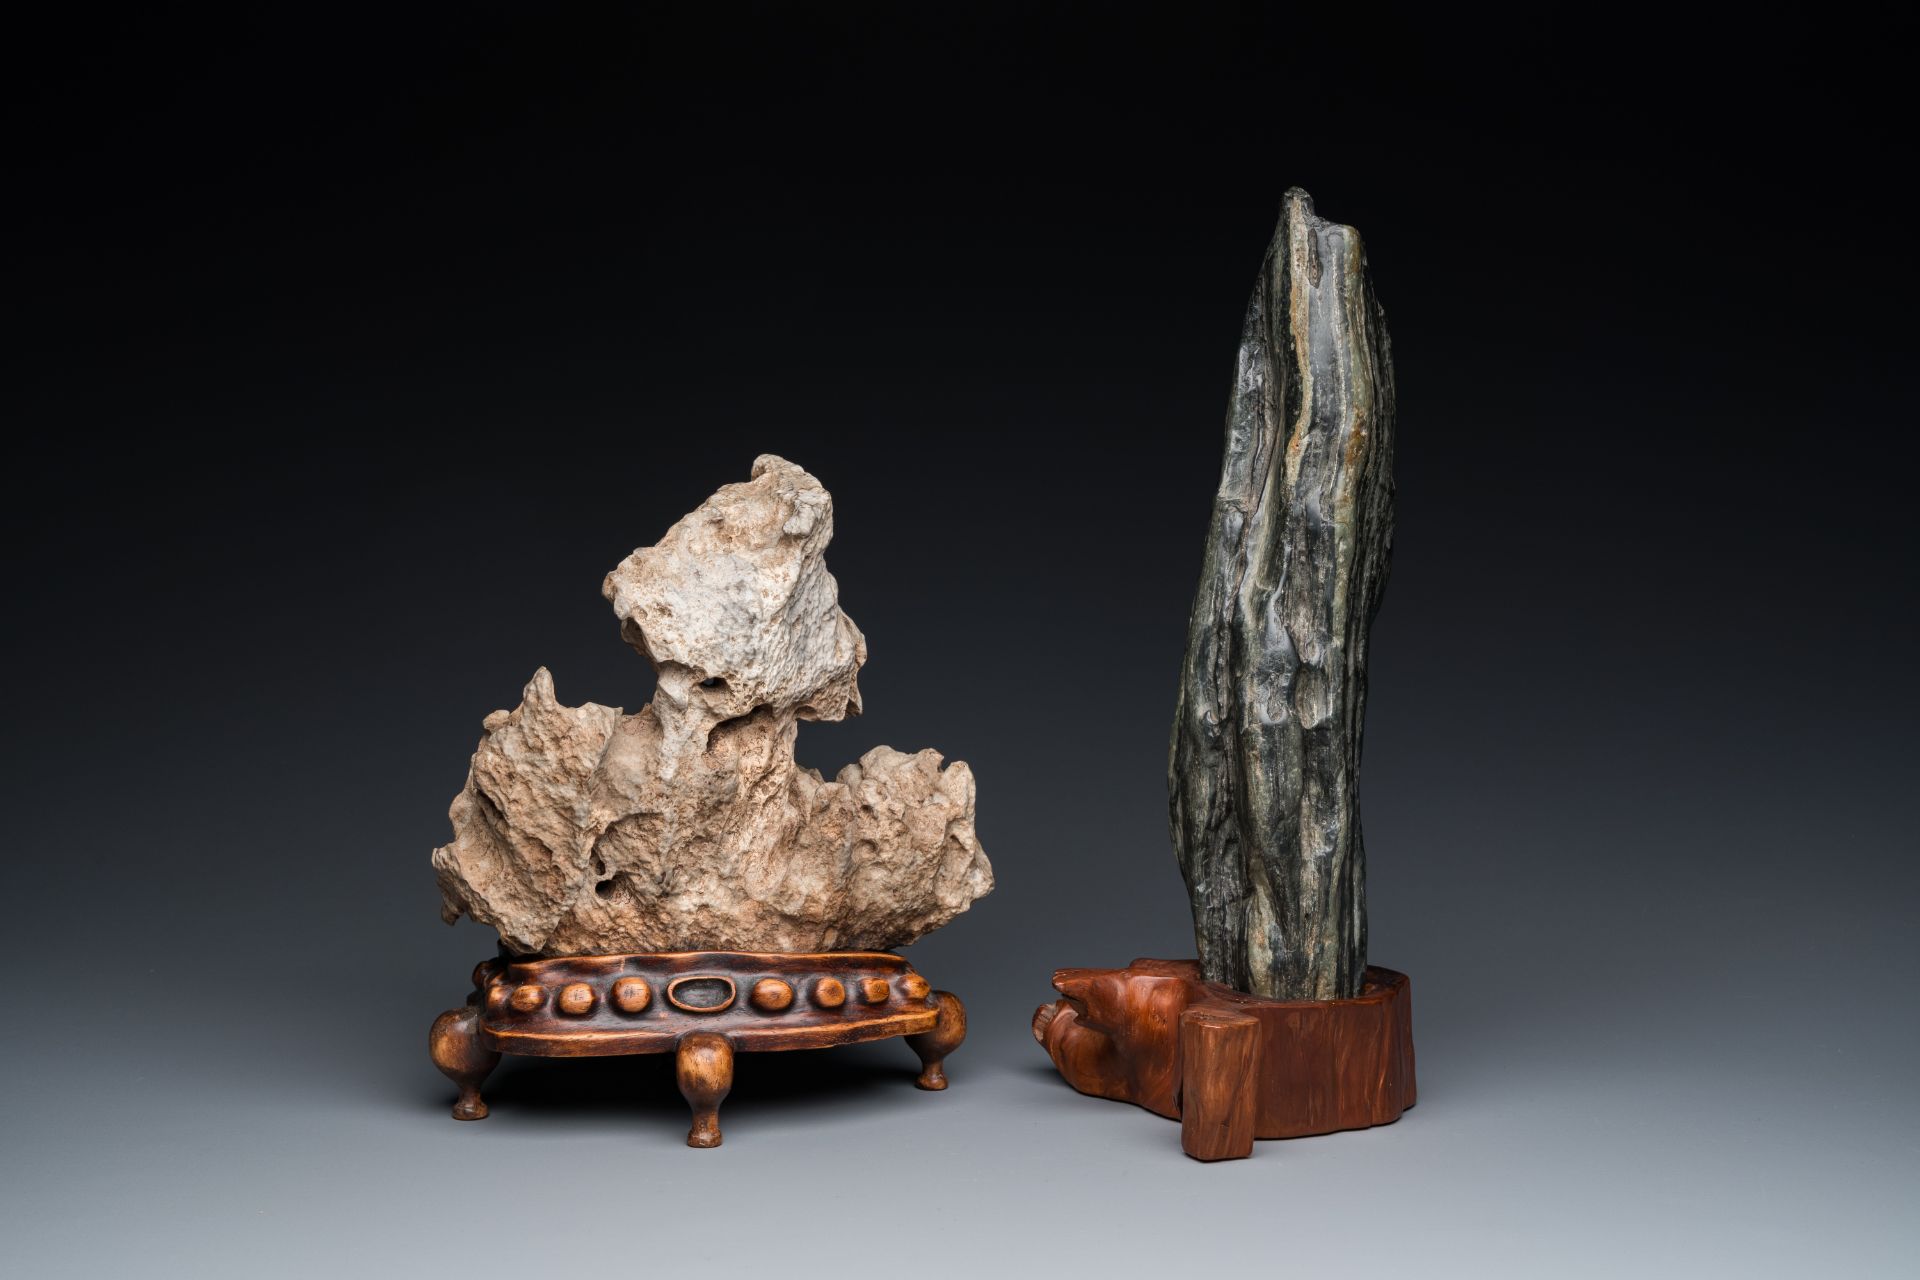 Two Chinese 'gongshi or 'scholar's rocks' on wood stands, Ming or later